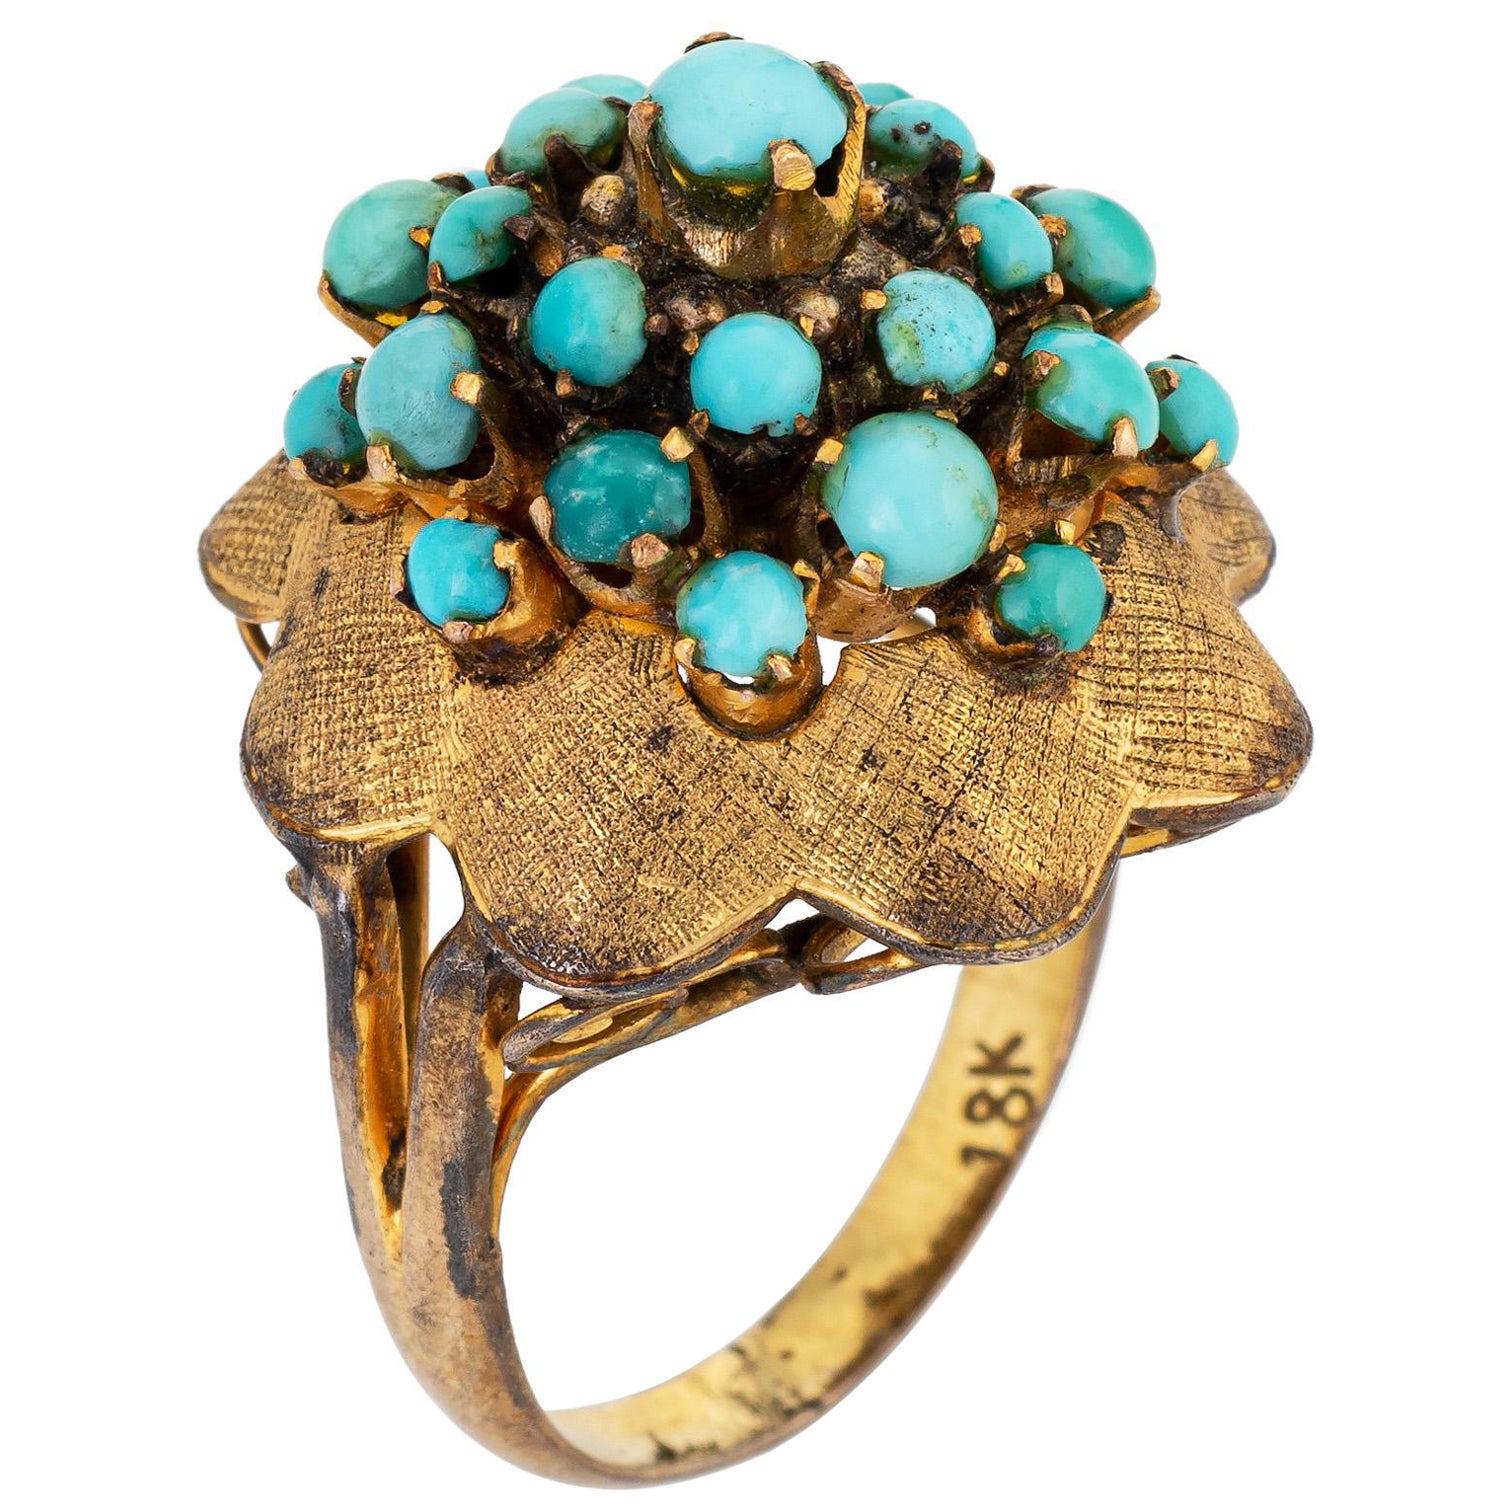 Vintage Turquoise Harem Ring 18k Yellow Gold Dome Estate Fine Jewelry